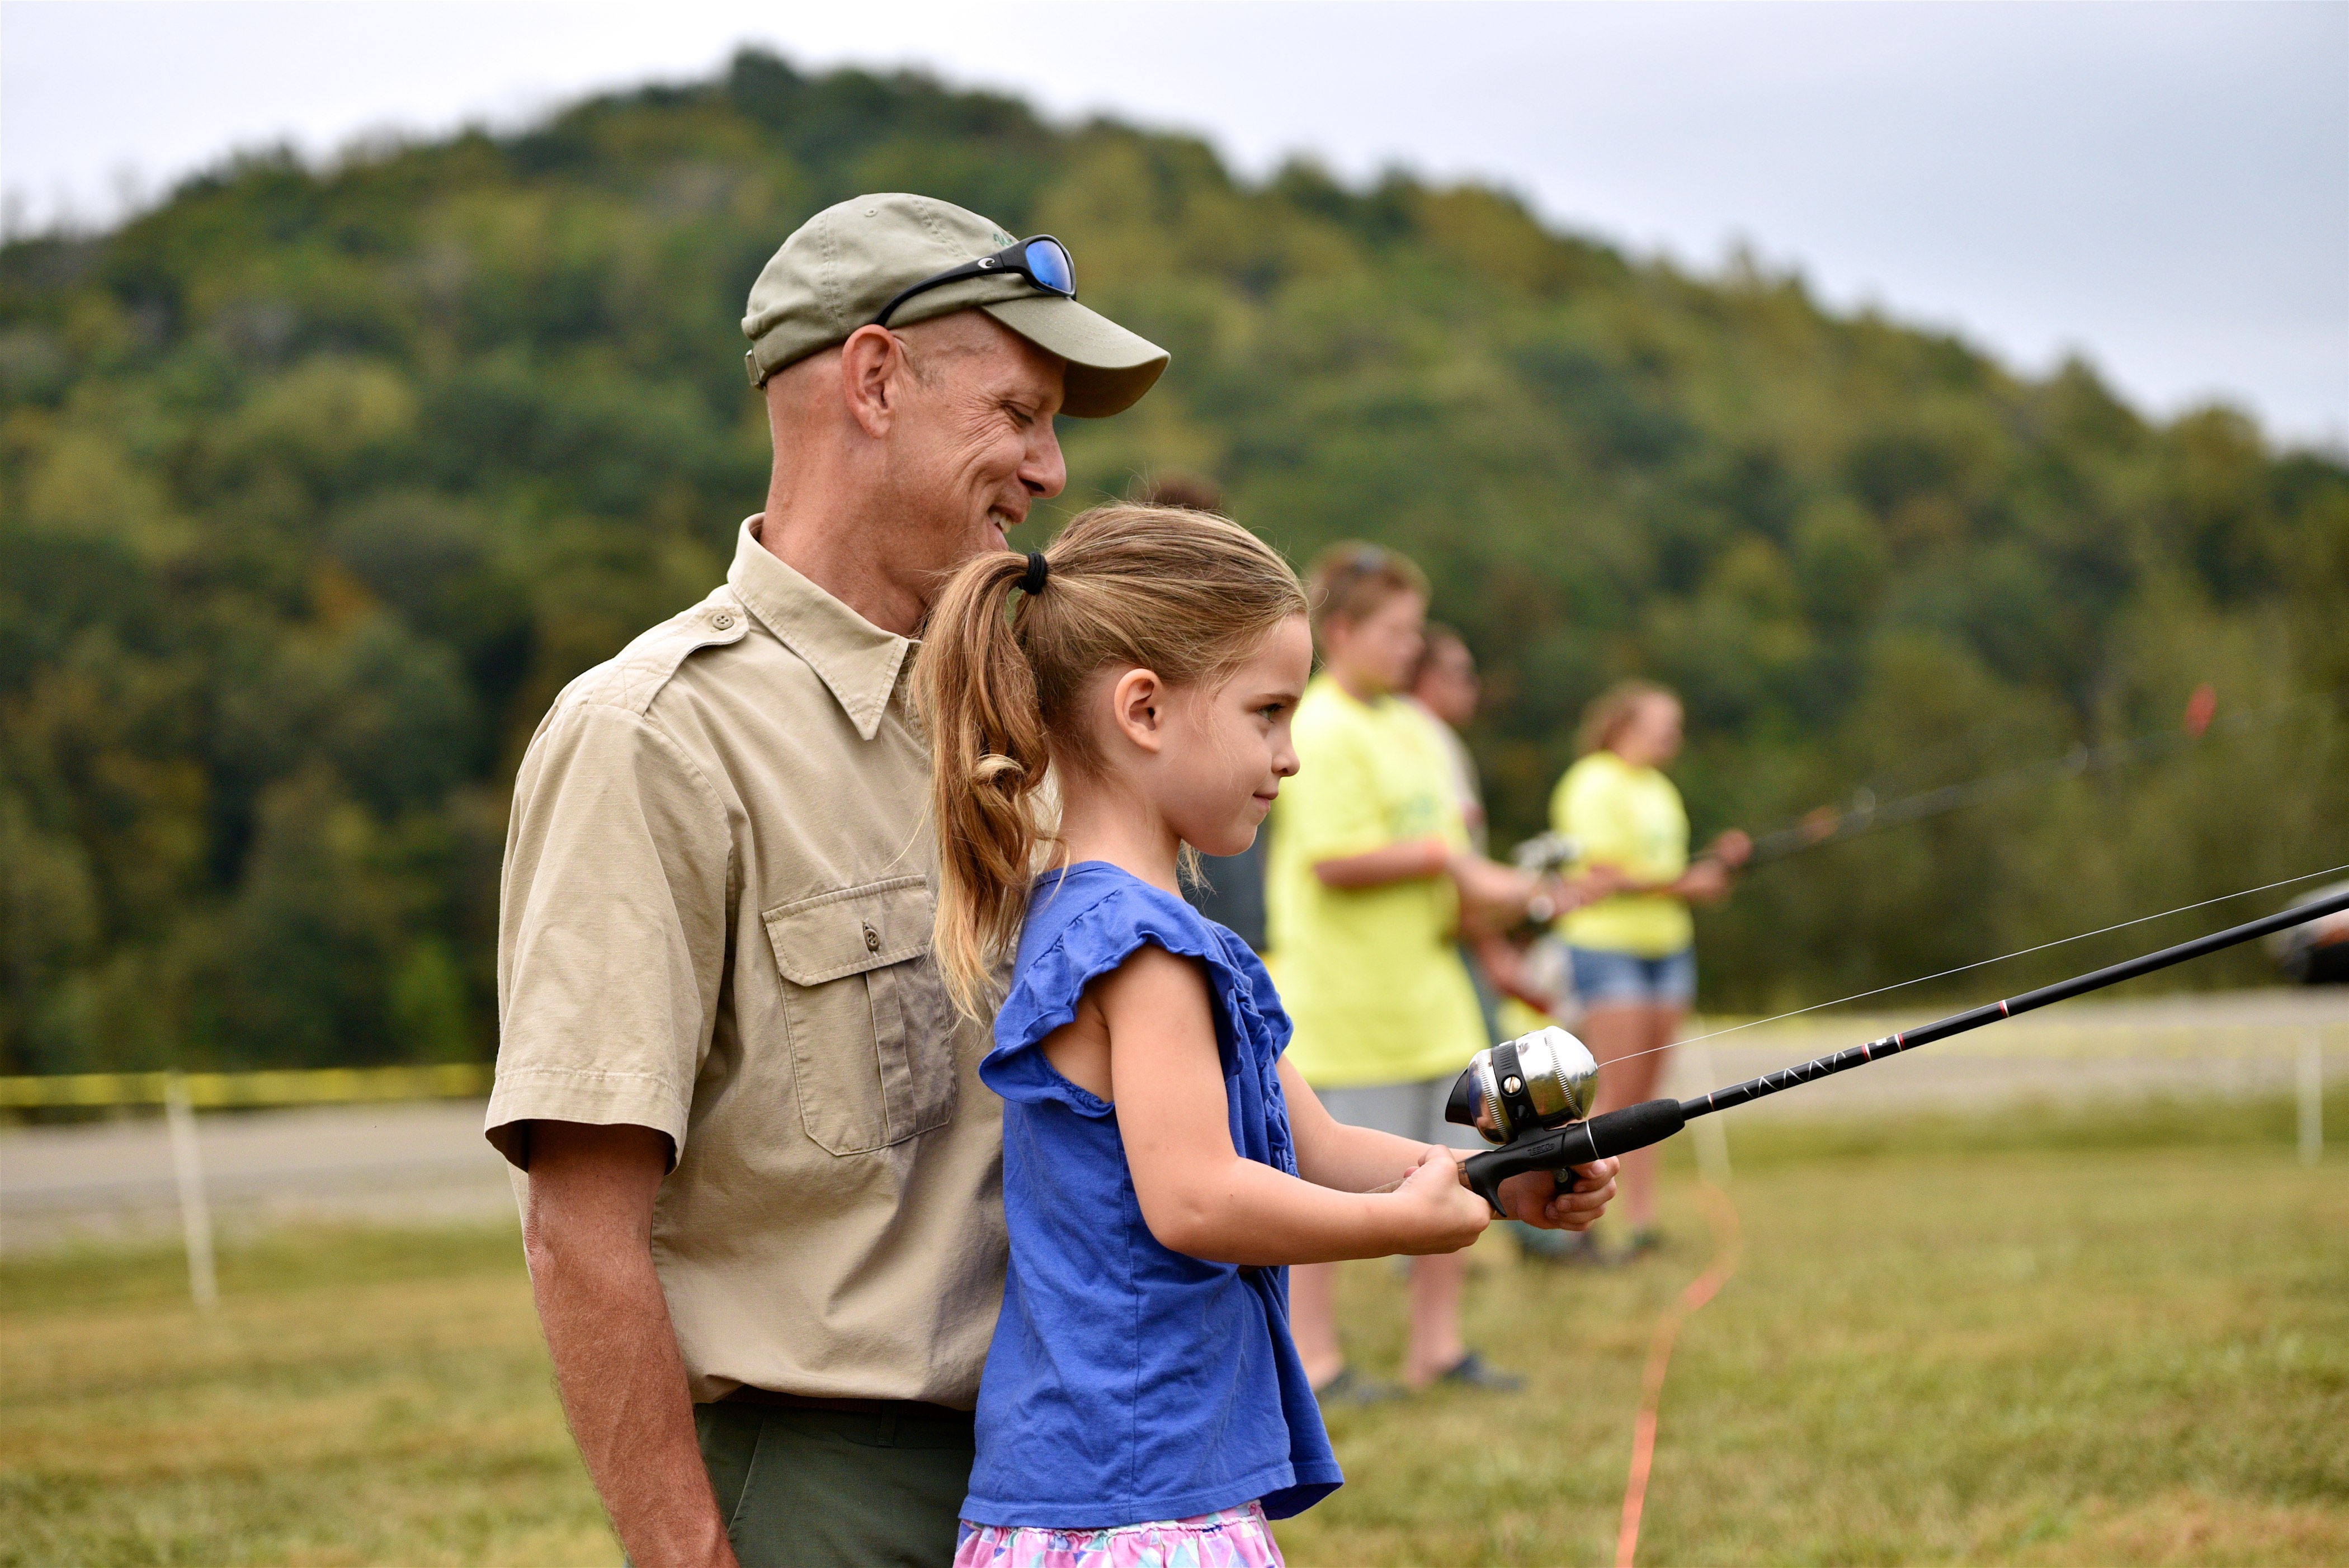 Gov. Justice announces Free Fishing Days this weekend, June 9 and 10